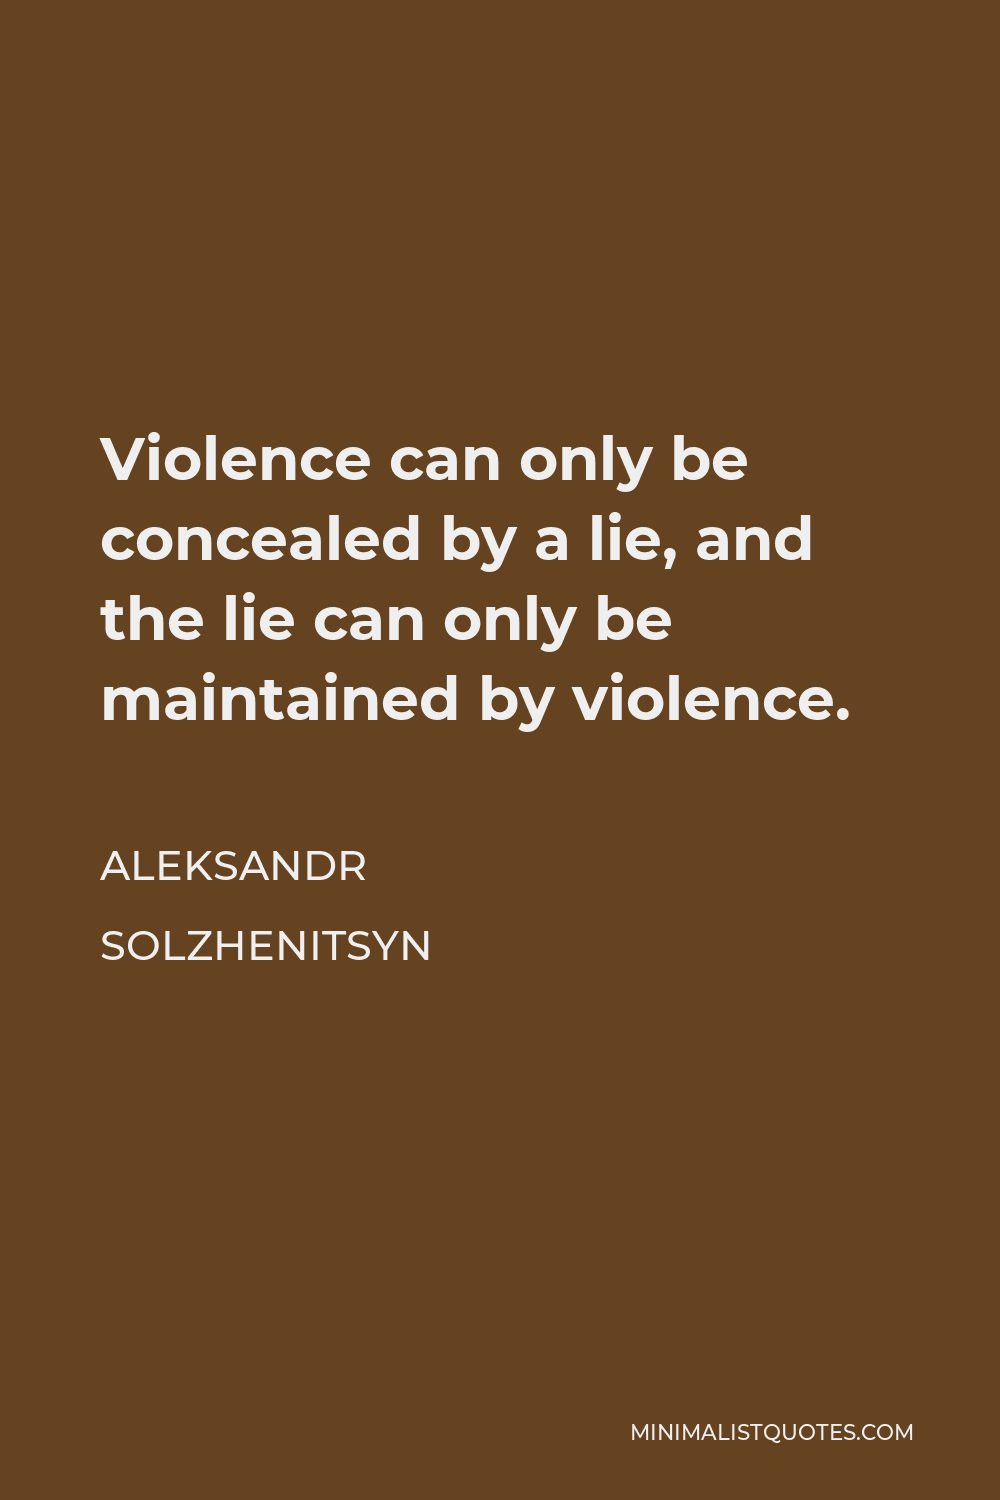 Aleksandr Solzhenitsyn Quote - Violence can only be concealed by a lie, and the lie can only be maintained by violence.